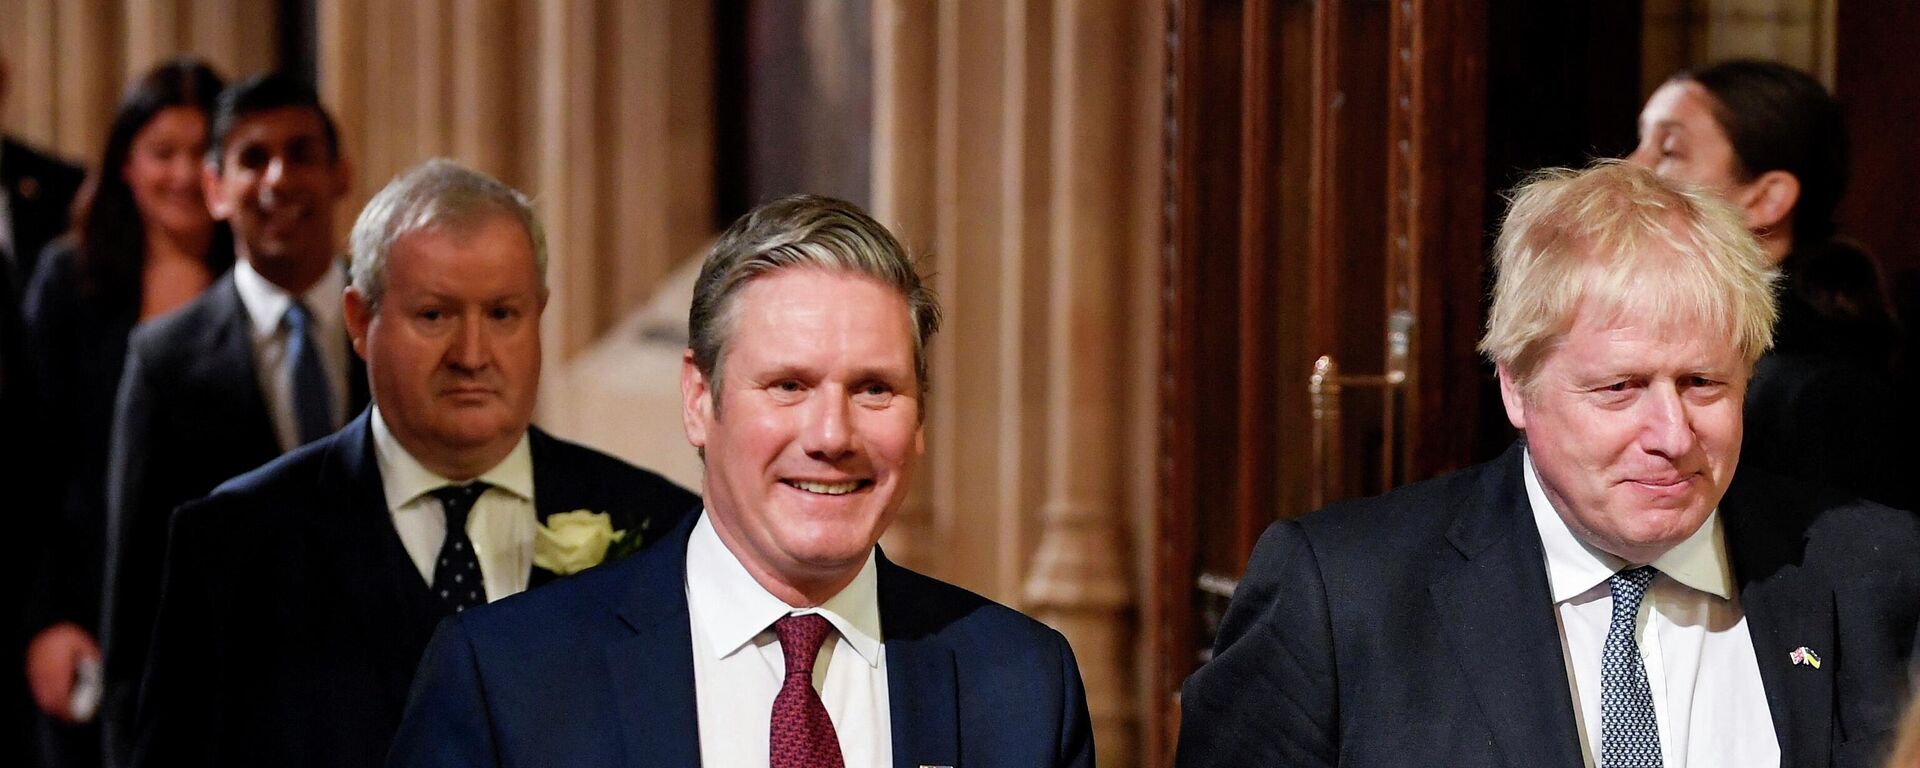 Britain's Prime Minister Boris Johnson, right, and British Labour Party opposition leader Keir Starmer proceed through the Members' Lobby for the State Opening of Parliament - Sputnik International, 1920, 18.05.2022